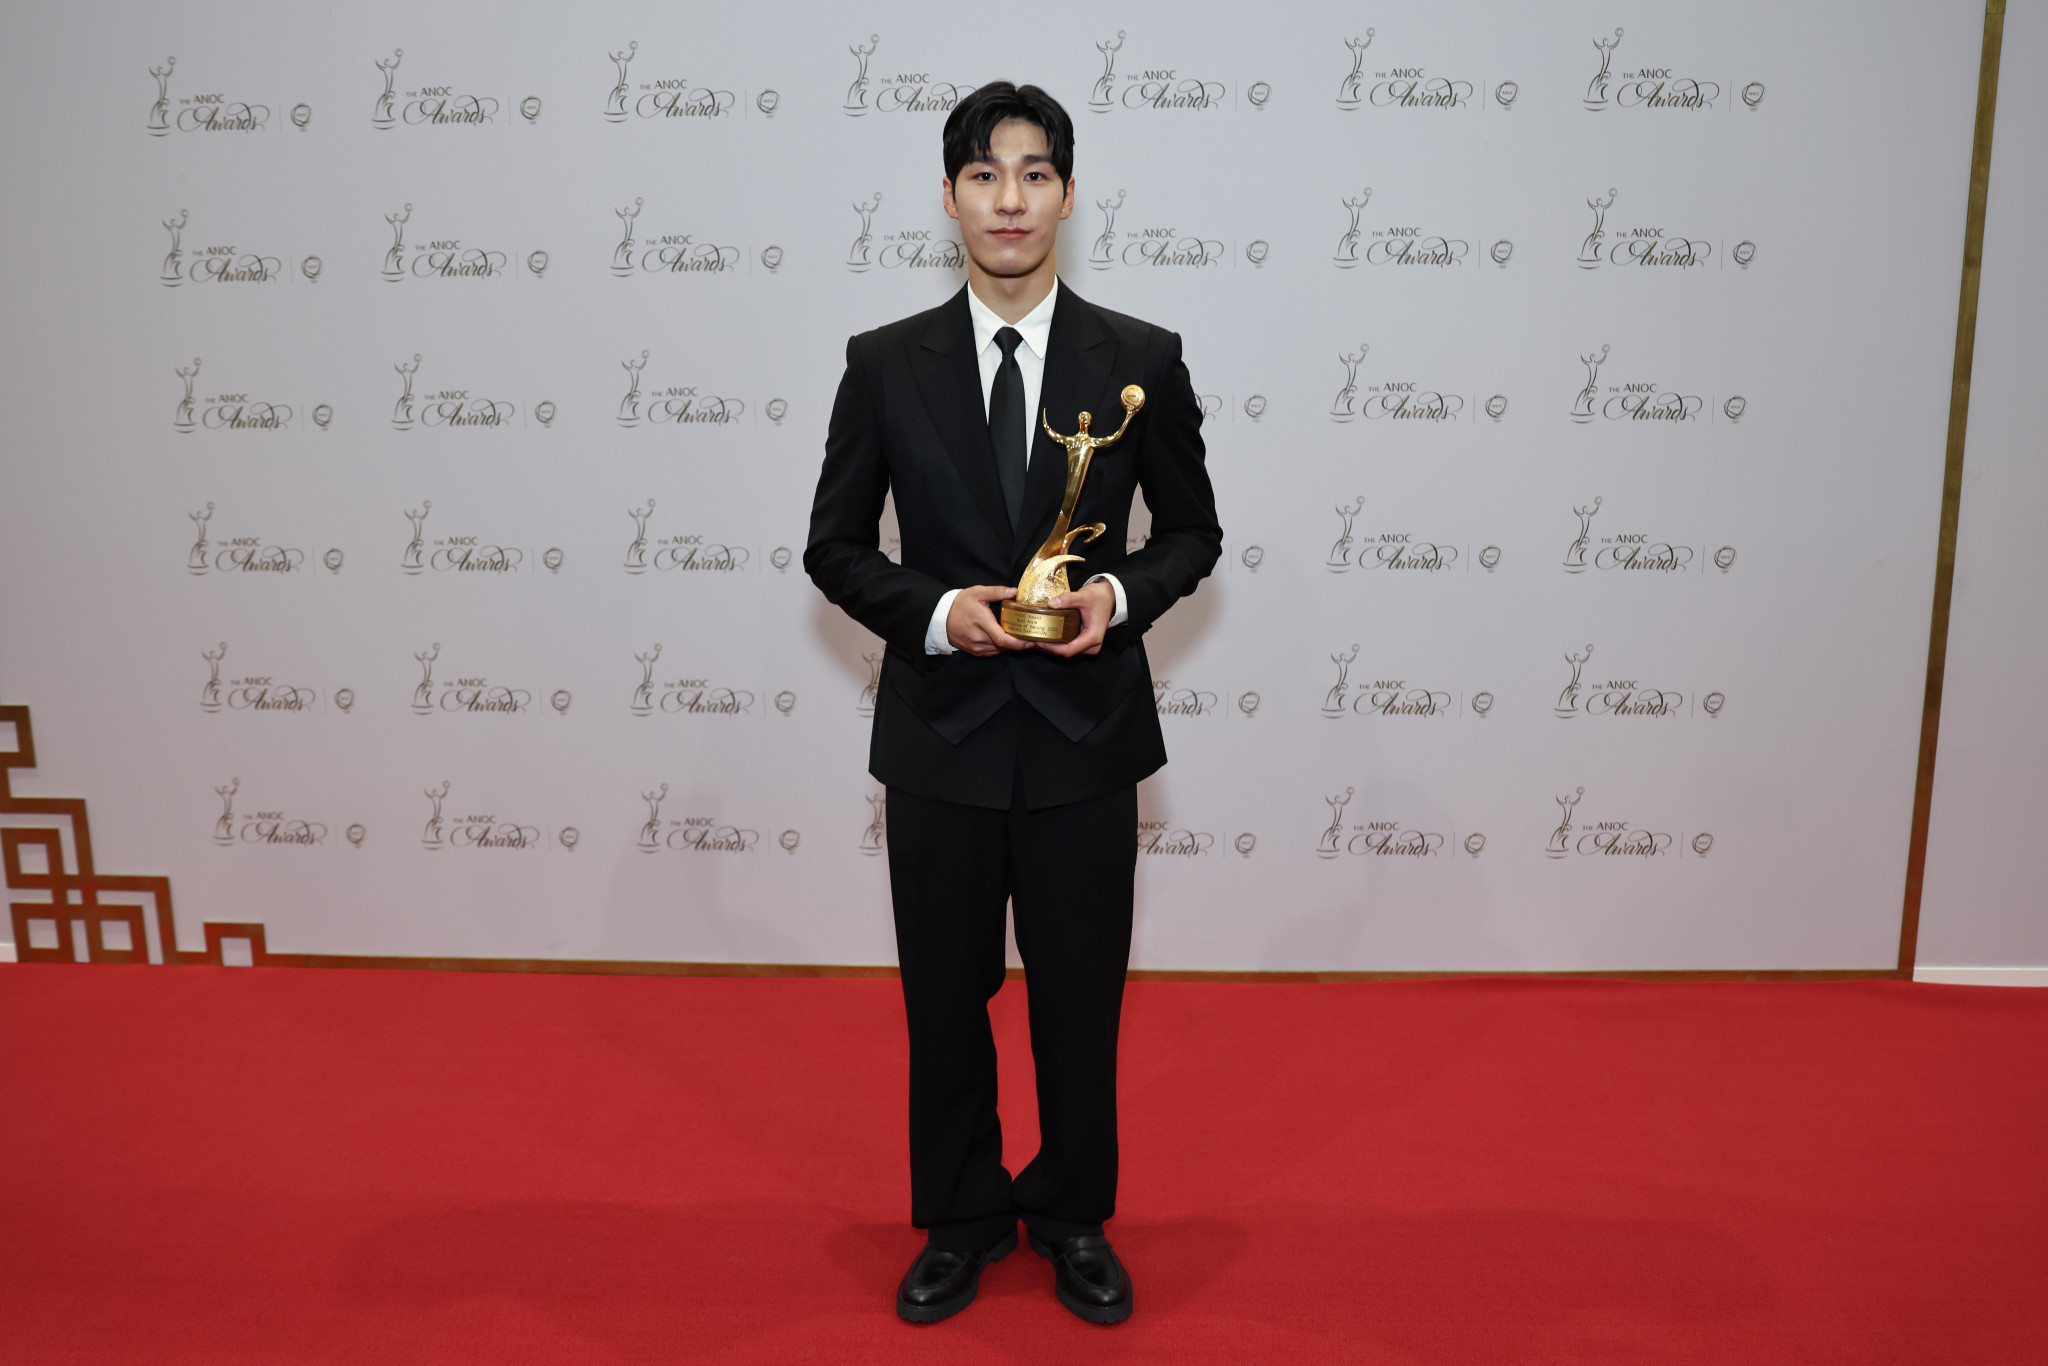 Ailing (Eileen) Gu and Hwang Dae-heon crowned best athletes of Beijing 2022  at ANOC Awards